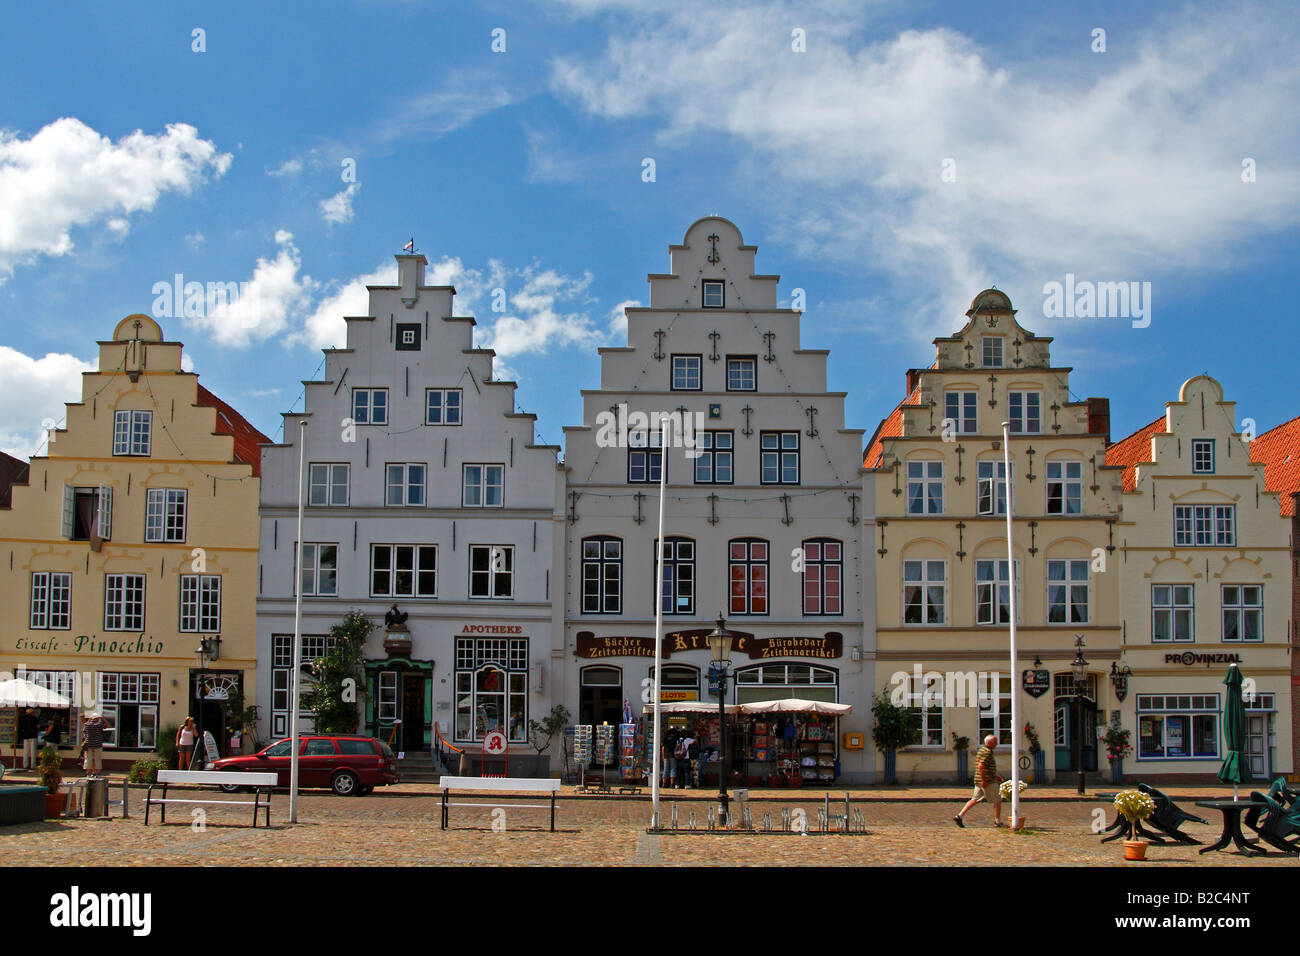 Historic houses at the market square of Friedrichsstadt, crow-stepped gable houses, Dutch stores, Friedrichstadt Stock Photo